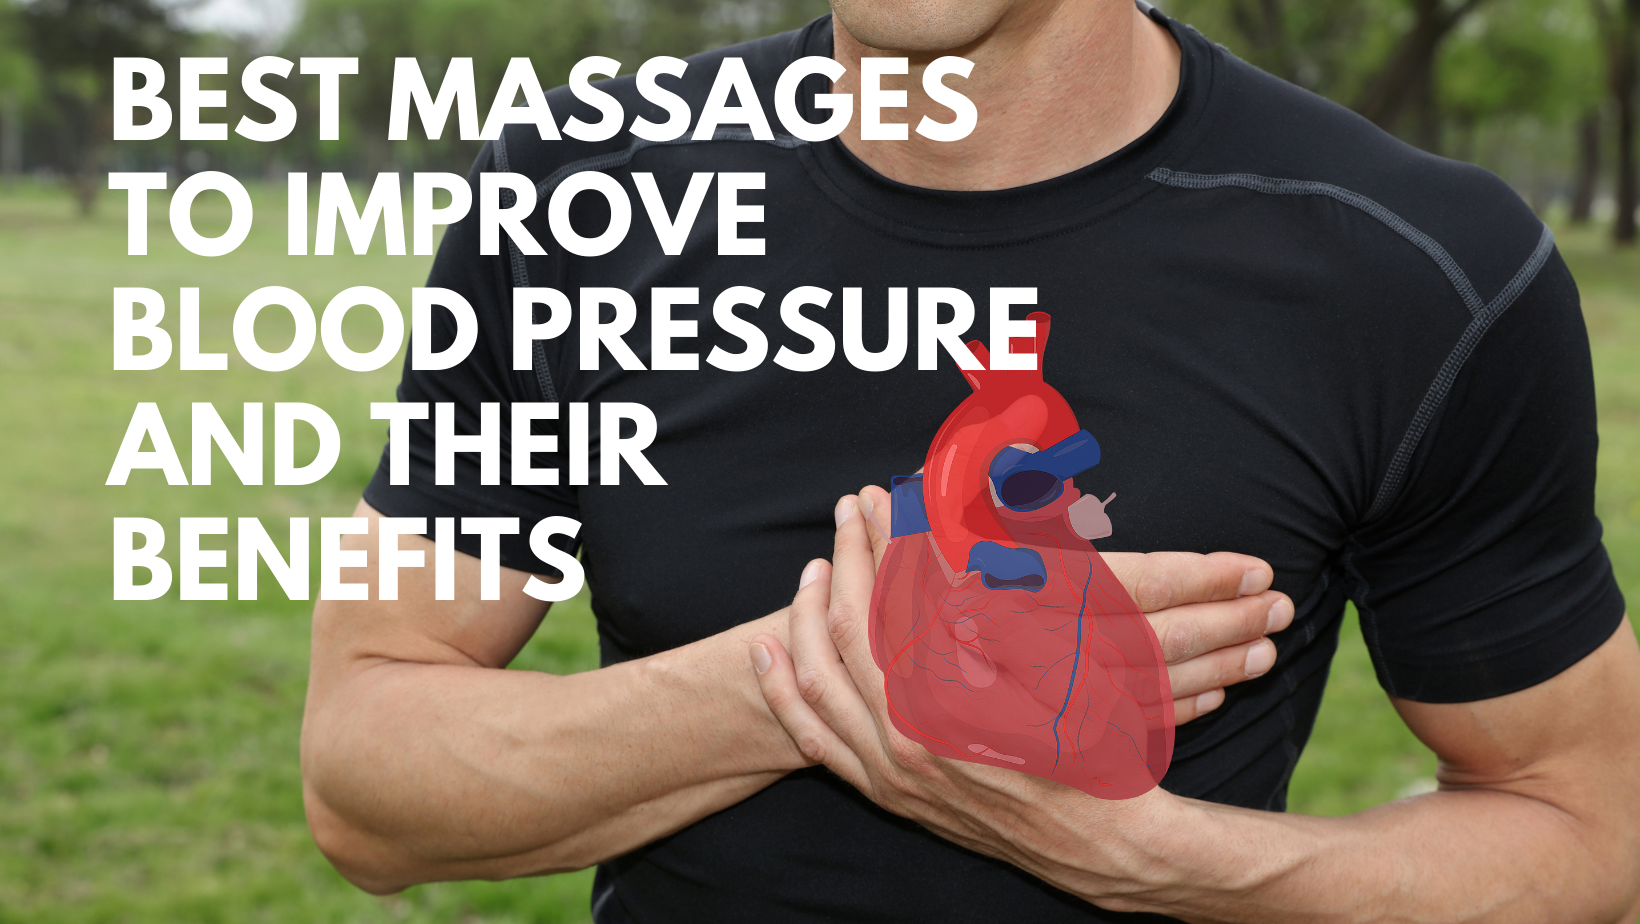 Best Massages to Improve Blood Pressure and their Benefits